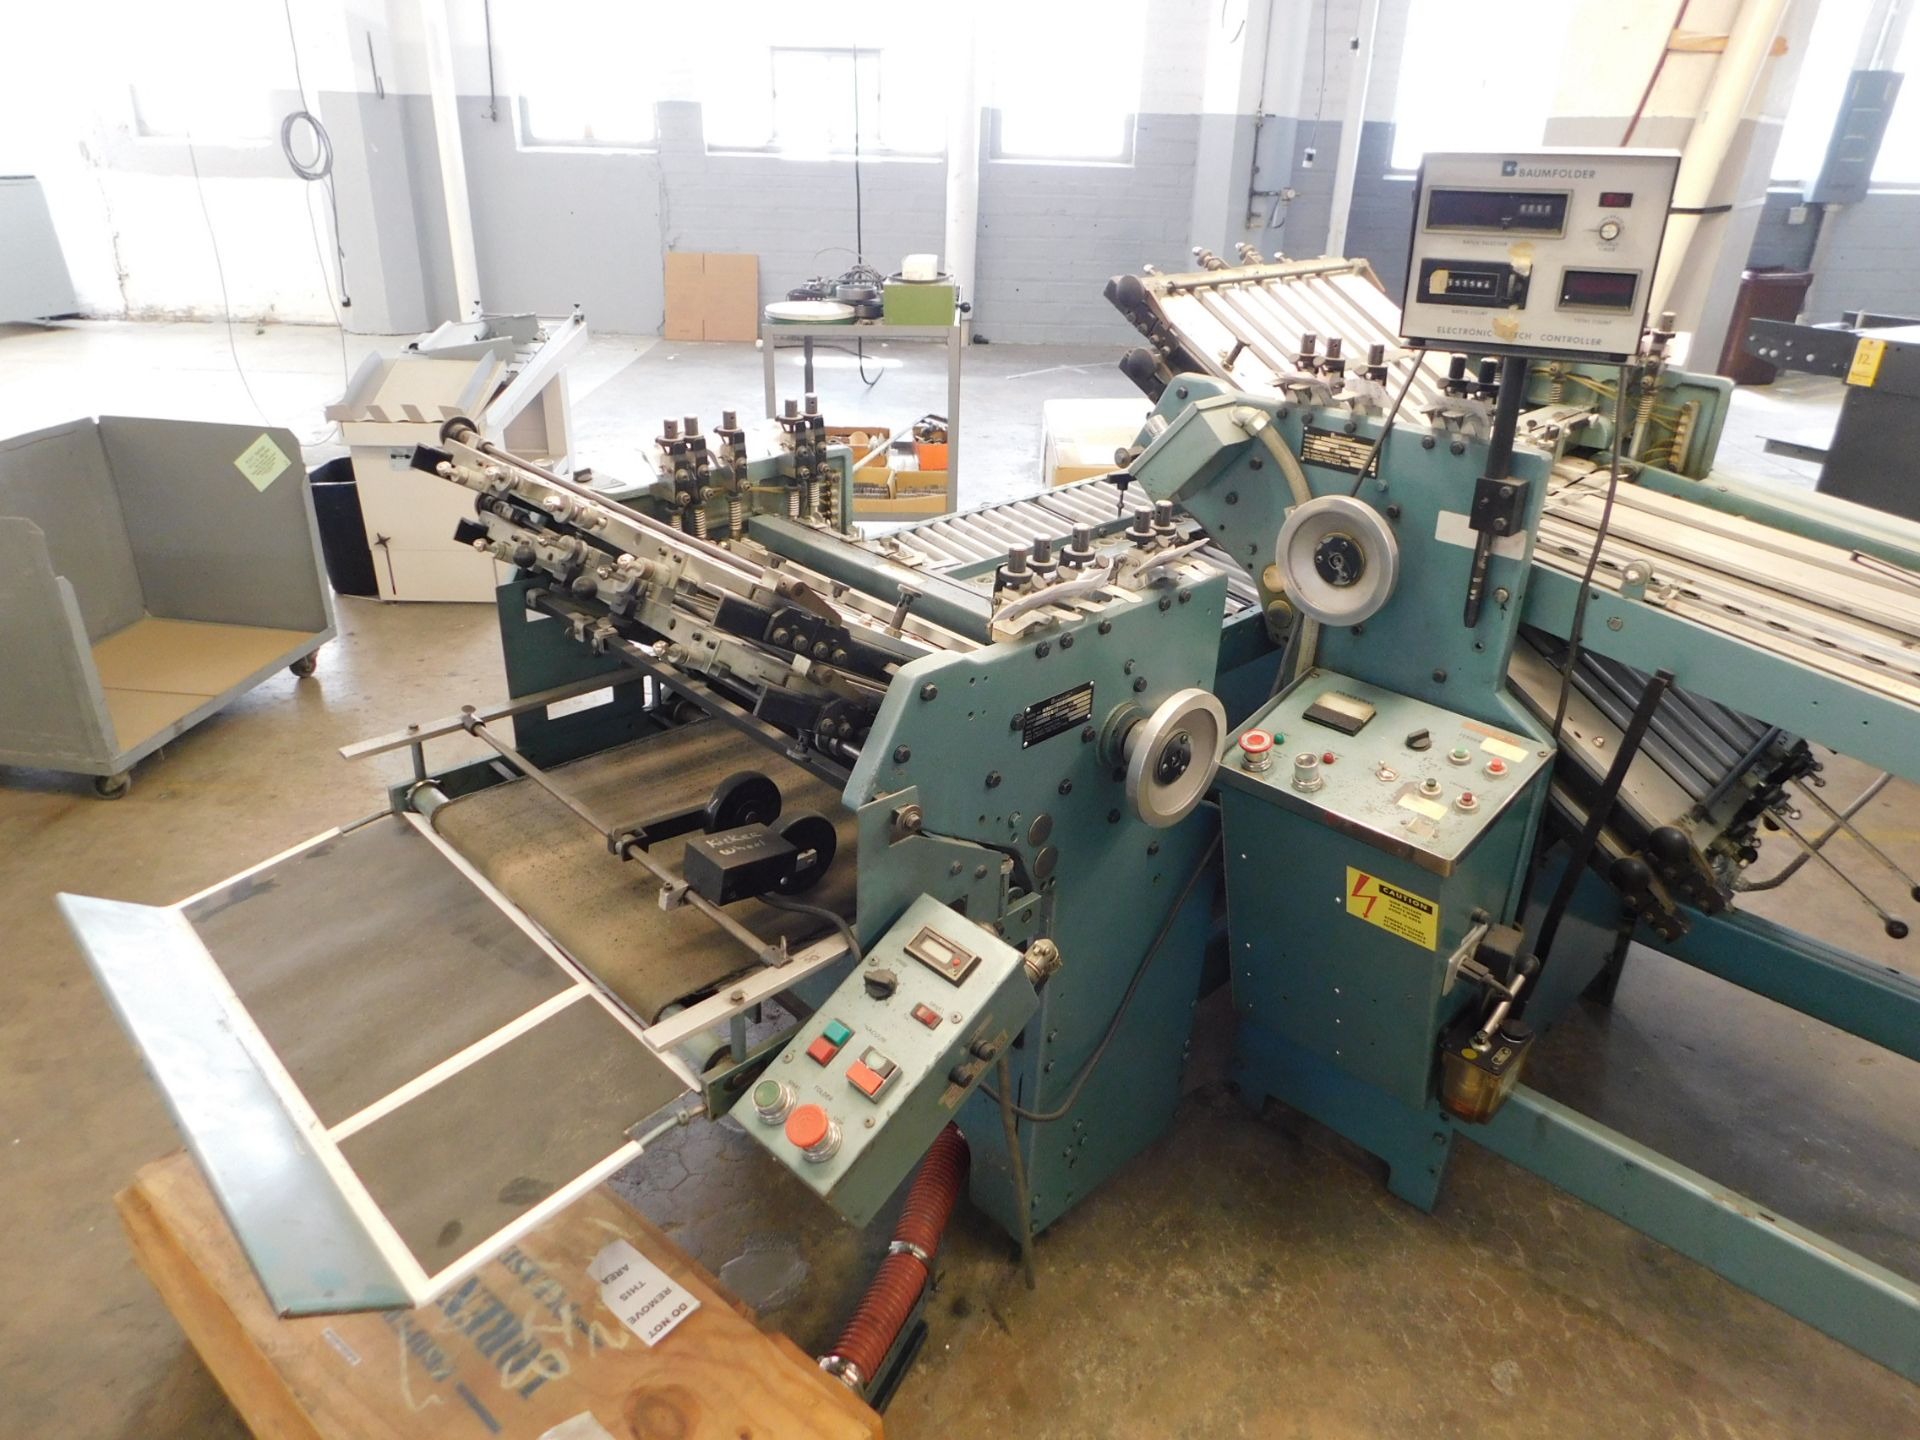 Baumfolder 720 - 20 x 26 700B folder with 8 page unit, includes 700B - 20 x 20 8pp folding unit with - Image 3 of 7